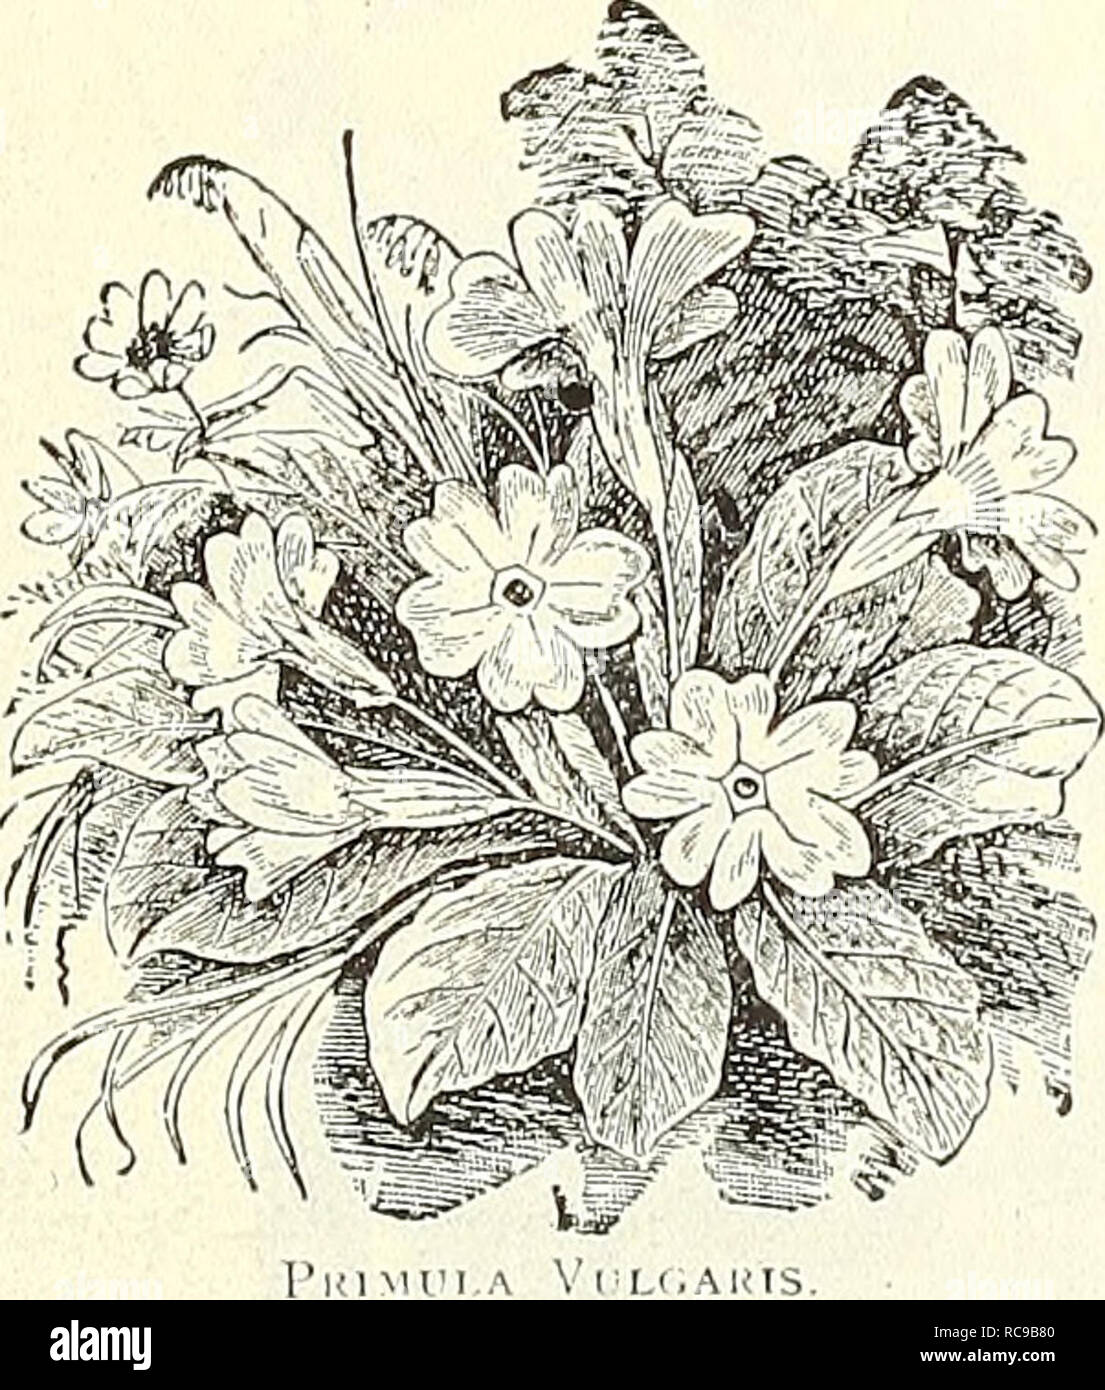 . Dreer's garden book : 1904. Seeds Catalogs; Nursery stock Catalogs; Gardening Equipment and supplies Catalogs; Flowers Seeds Catalogs; Vegetables Seeds Catalogs; Fruit Seeds Catalogs. Primula Cortup-oides Siebollii. PRIMUI^A il'iimrose). PODOPHYI^LUM. Peltatum [May Apple, or Aliuidrake). A well-known naUve plant which is worthy of a place in every shady border. 10 ct-^. each; $1.00 per doz. POLrEMONIUM (Jacob'.s Ladder). Useful border plants, about 12 inches high, with deep green finely-cut foliage ind spikes of showy flowers during June and July. Coeruieum. Showy tufted foliage and spikes o Stock Photo